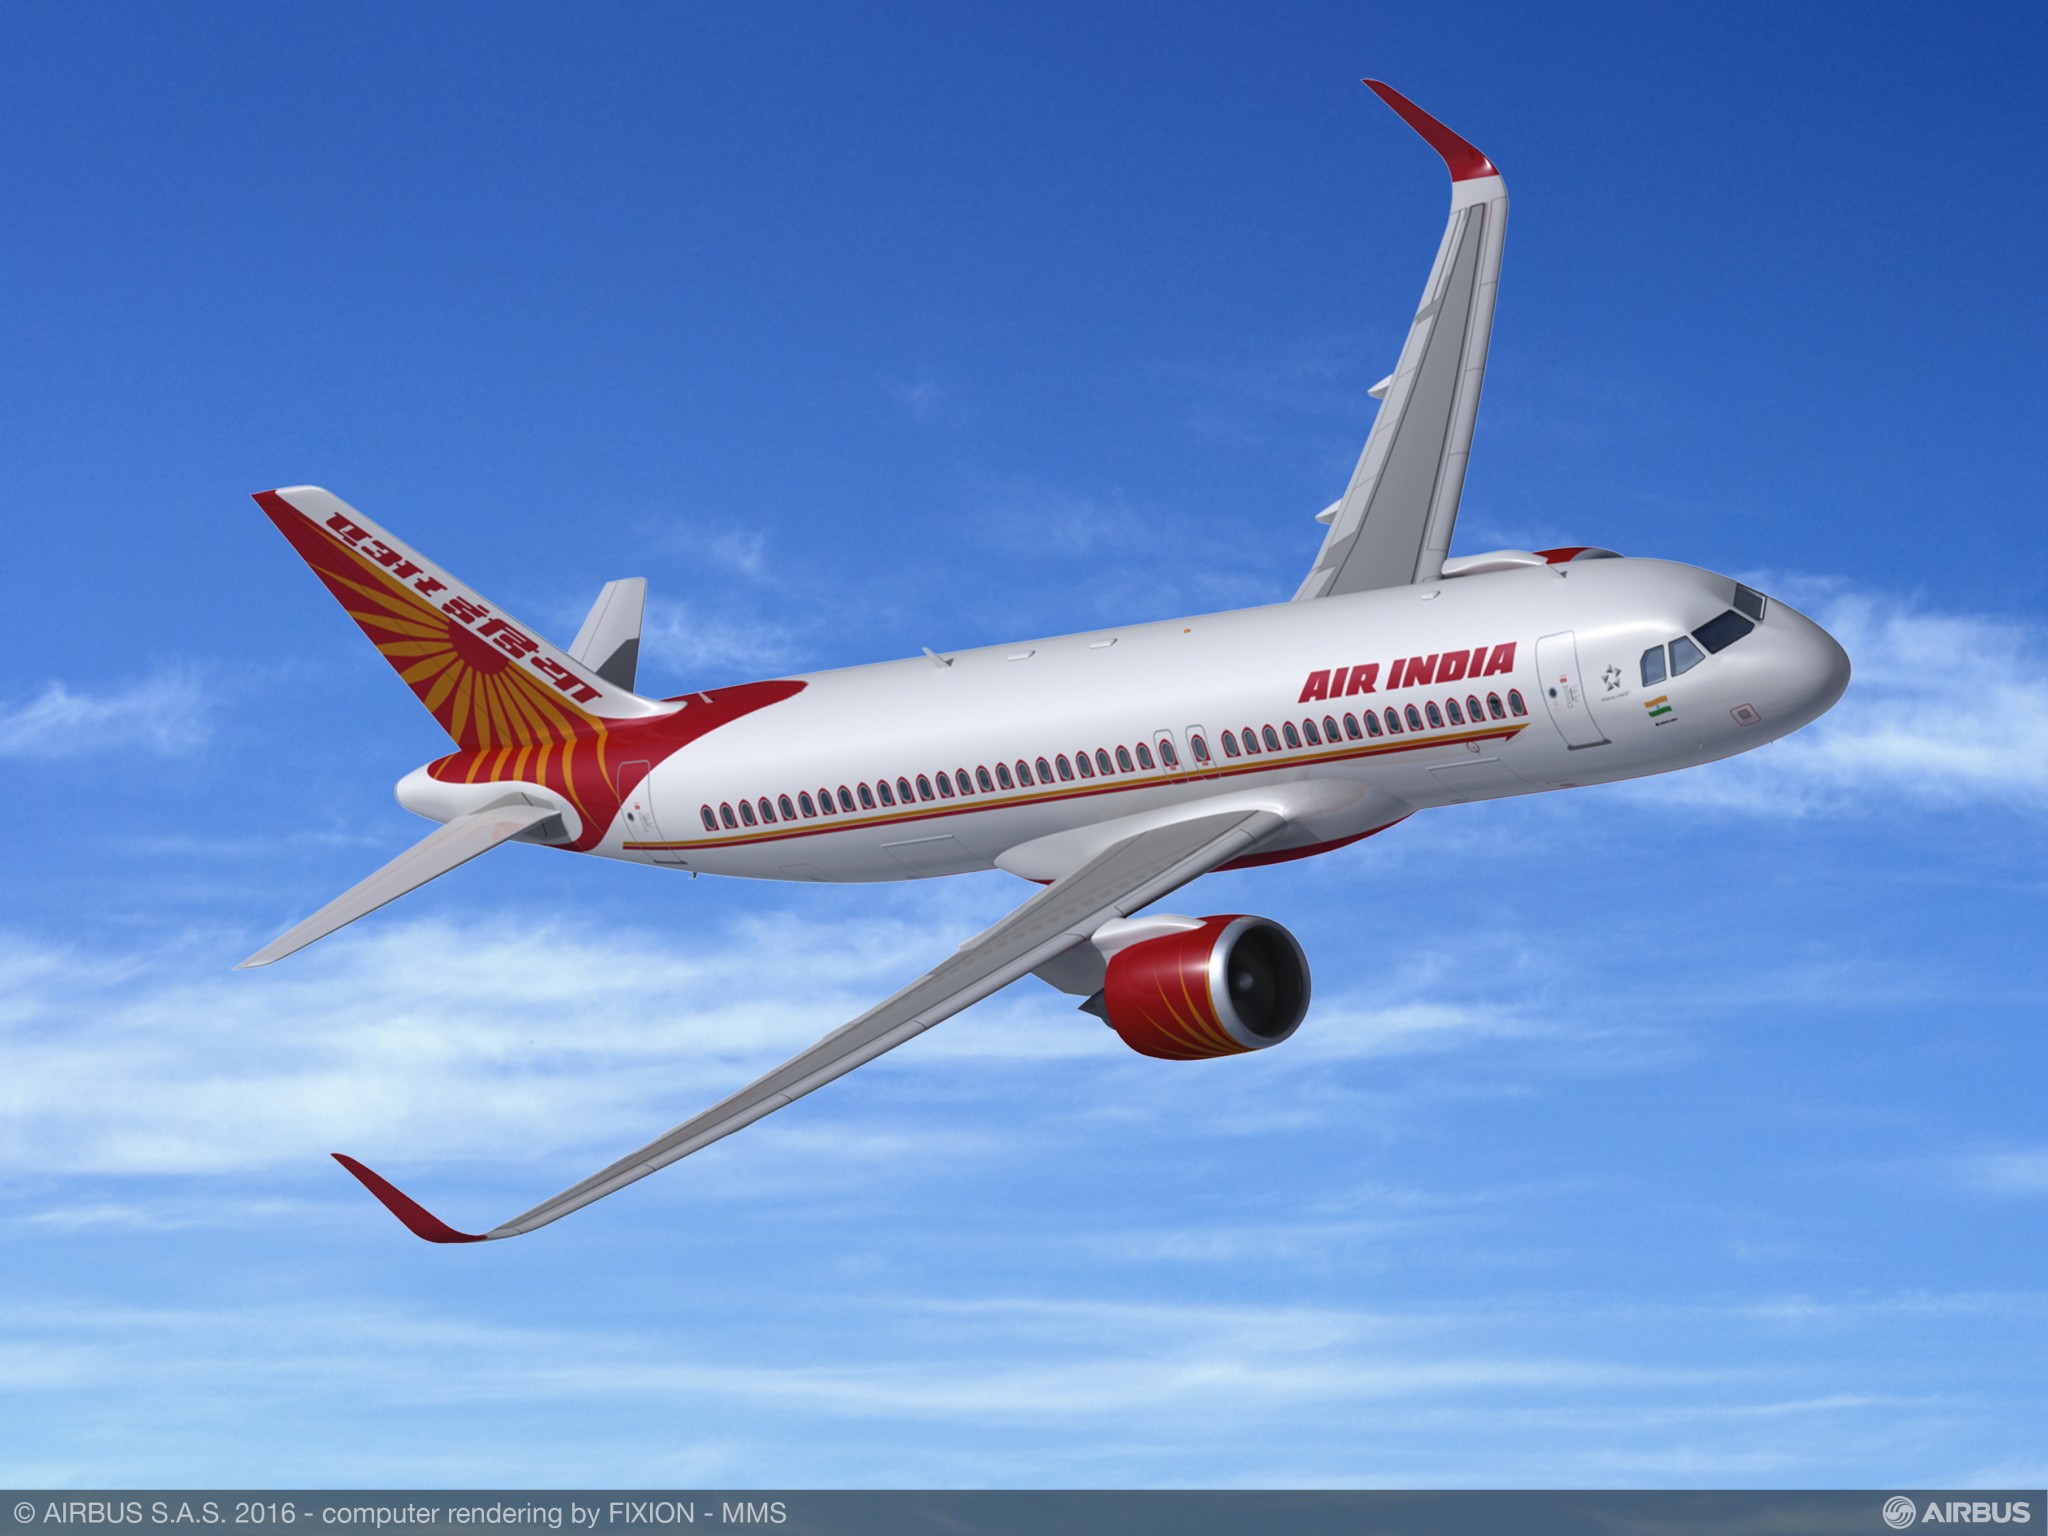 Air India to fly direct to Israel over Saudi airspace